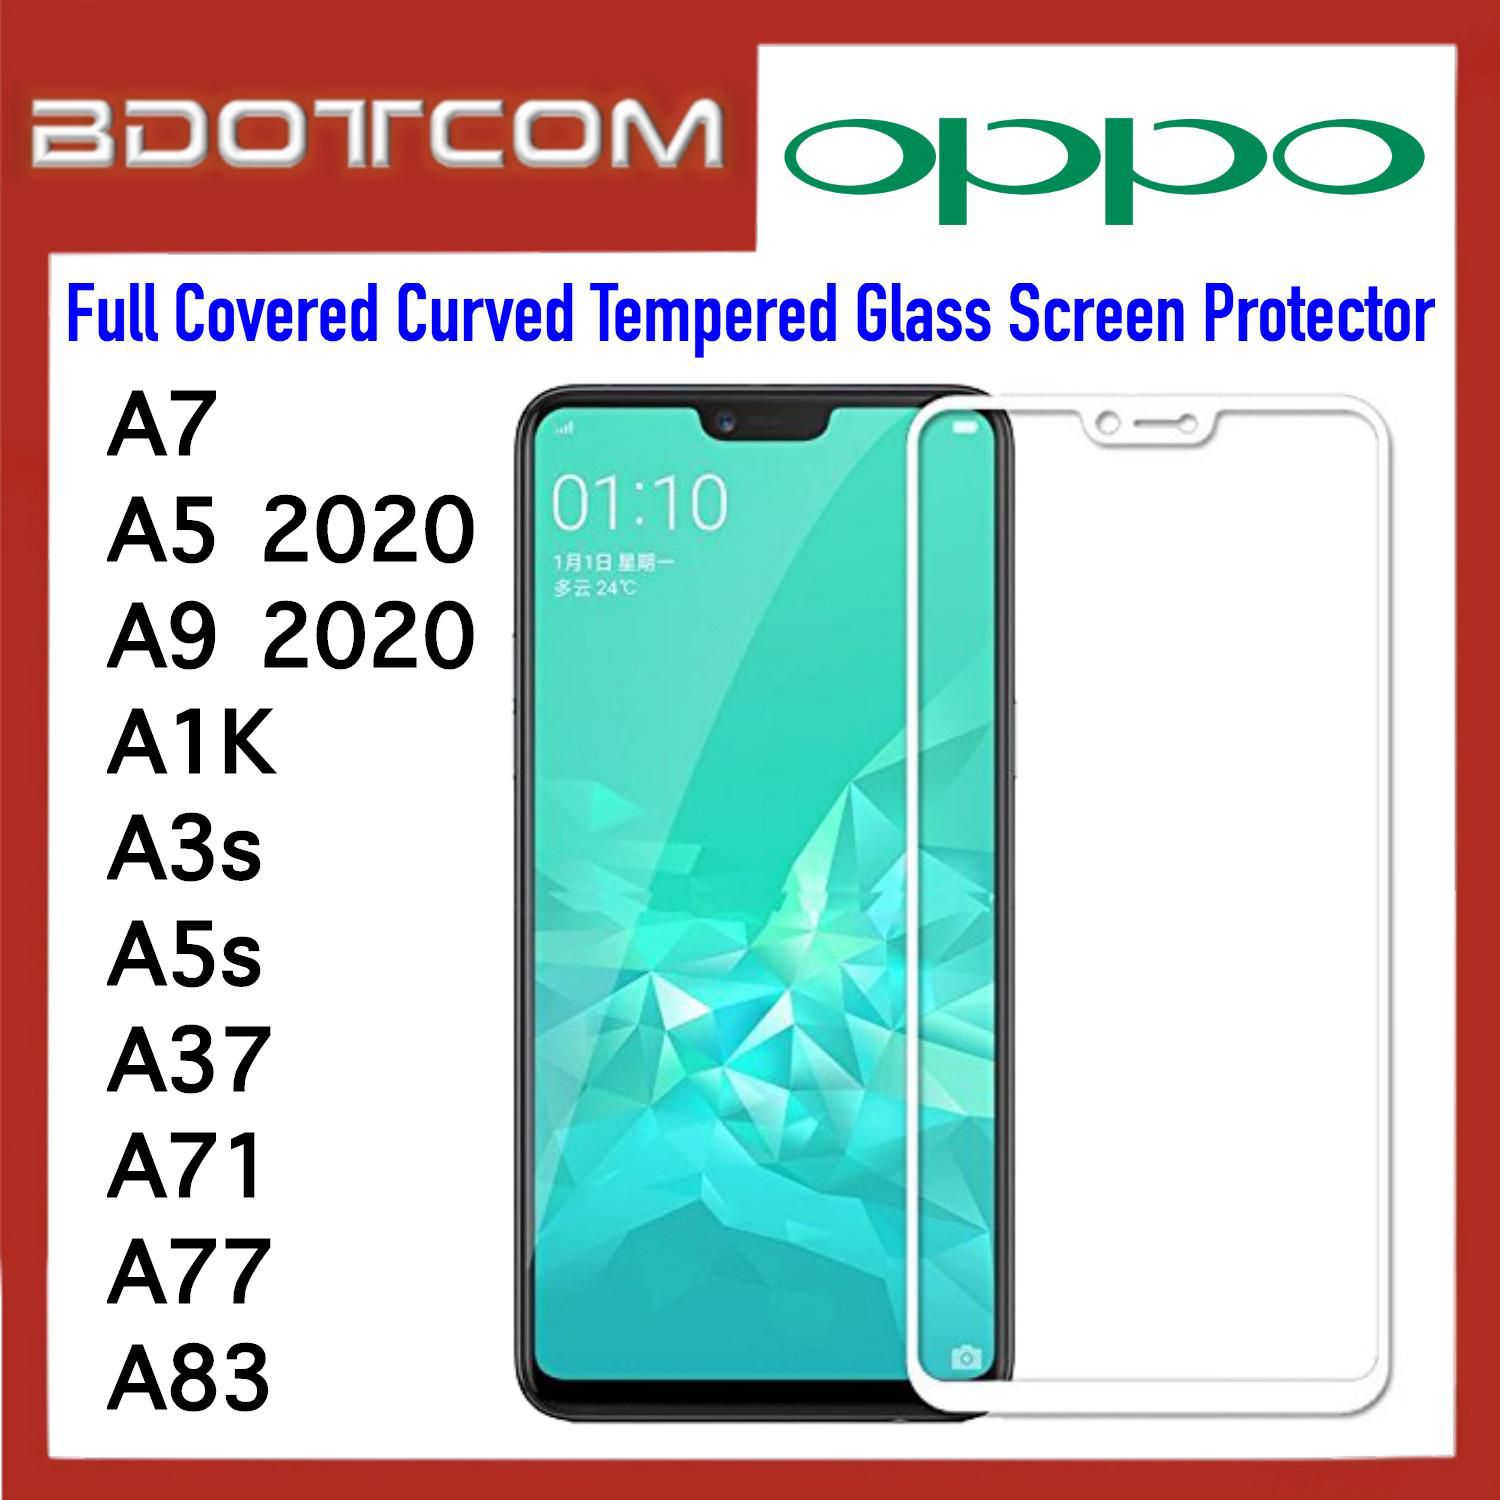 Bdotcom Full Covered Curved Tempered Glass Screen Protector for Oppo A7(White)